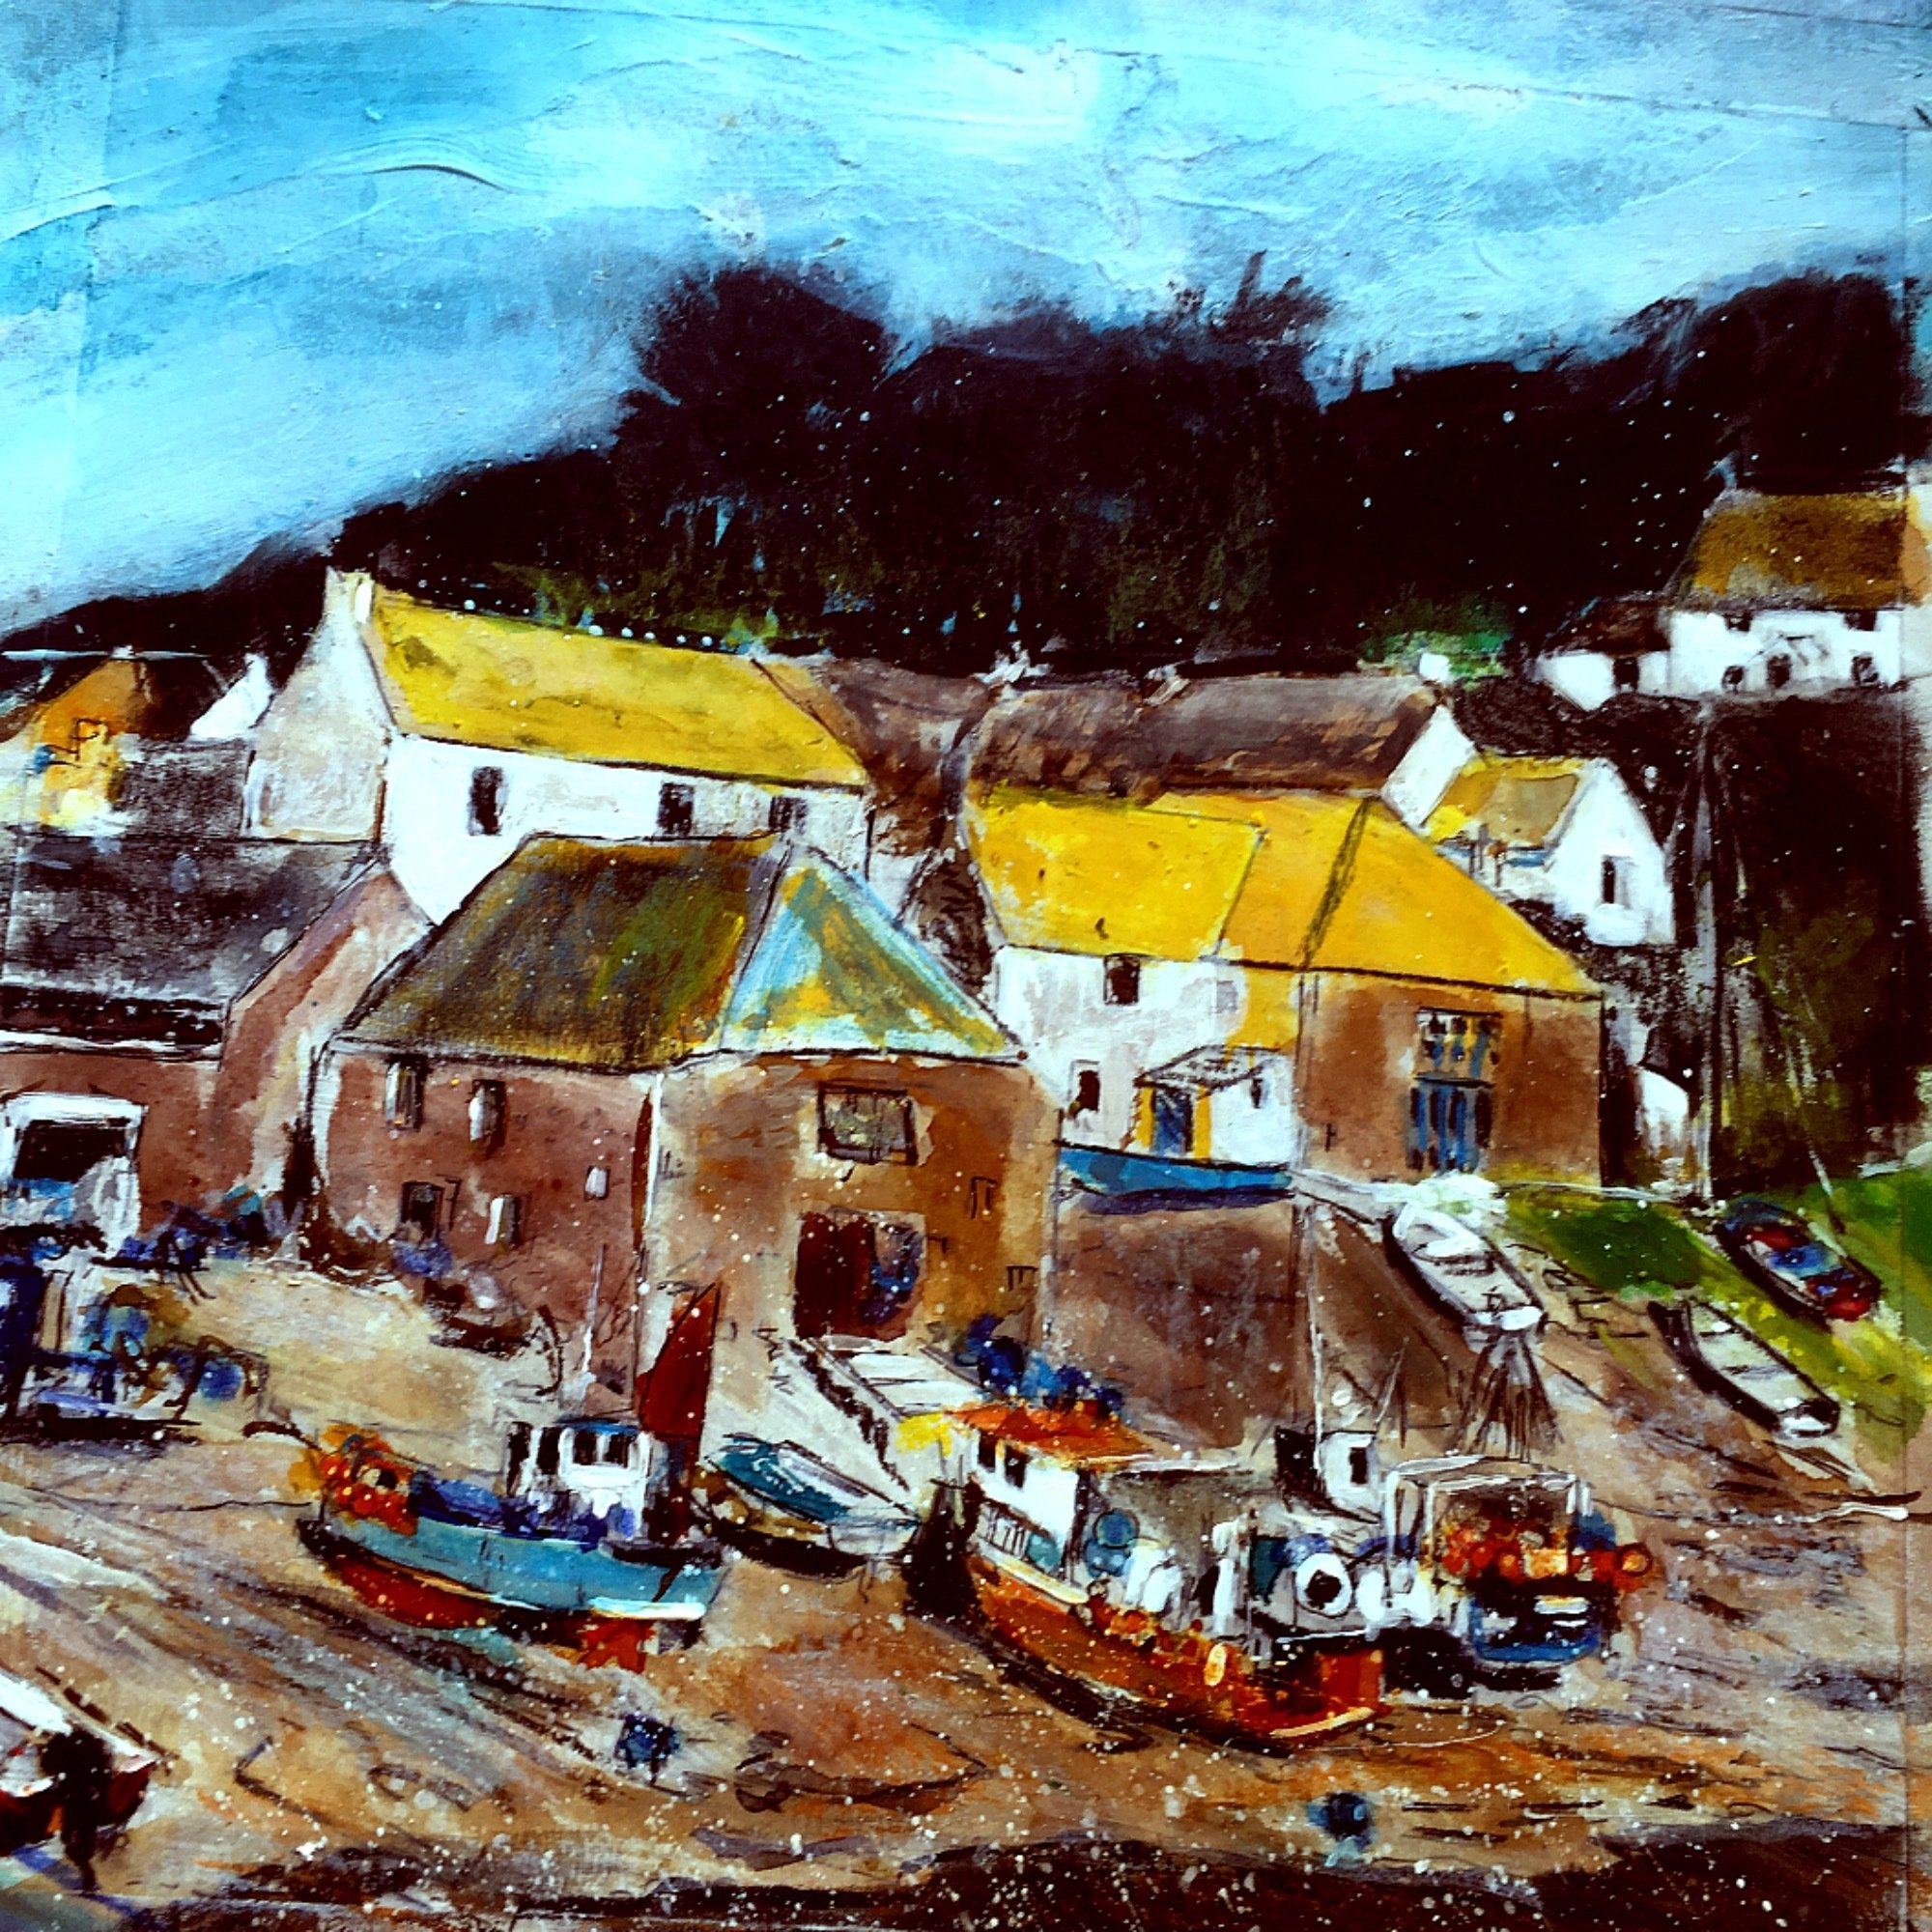 Sketch at Cadgwith